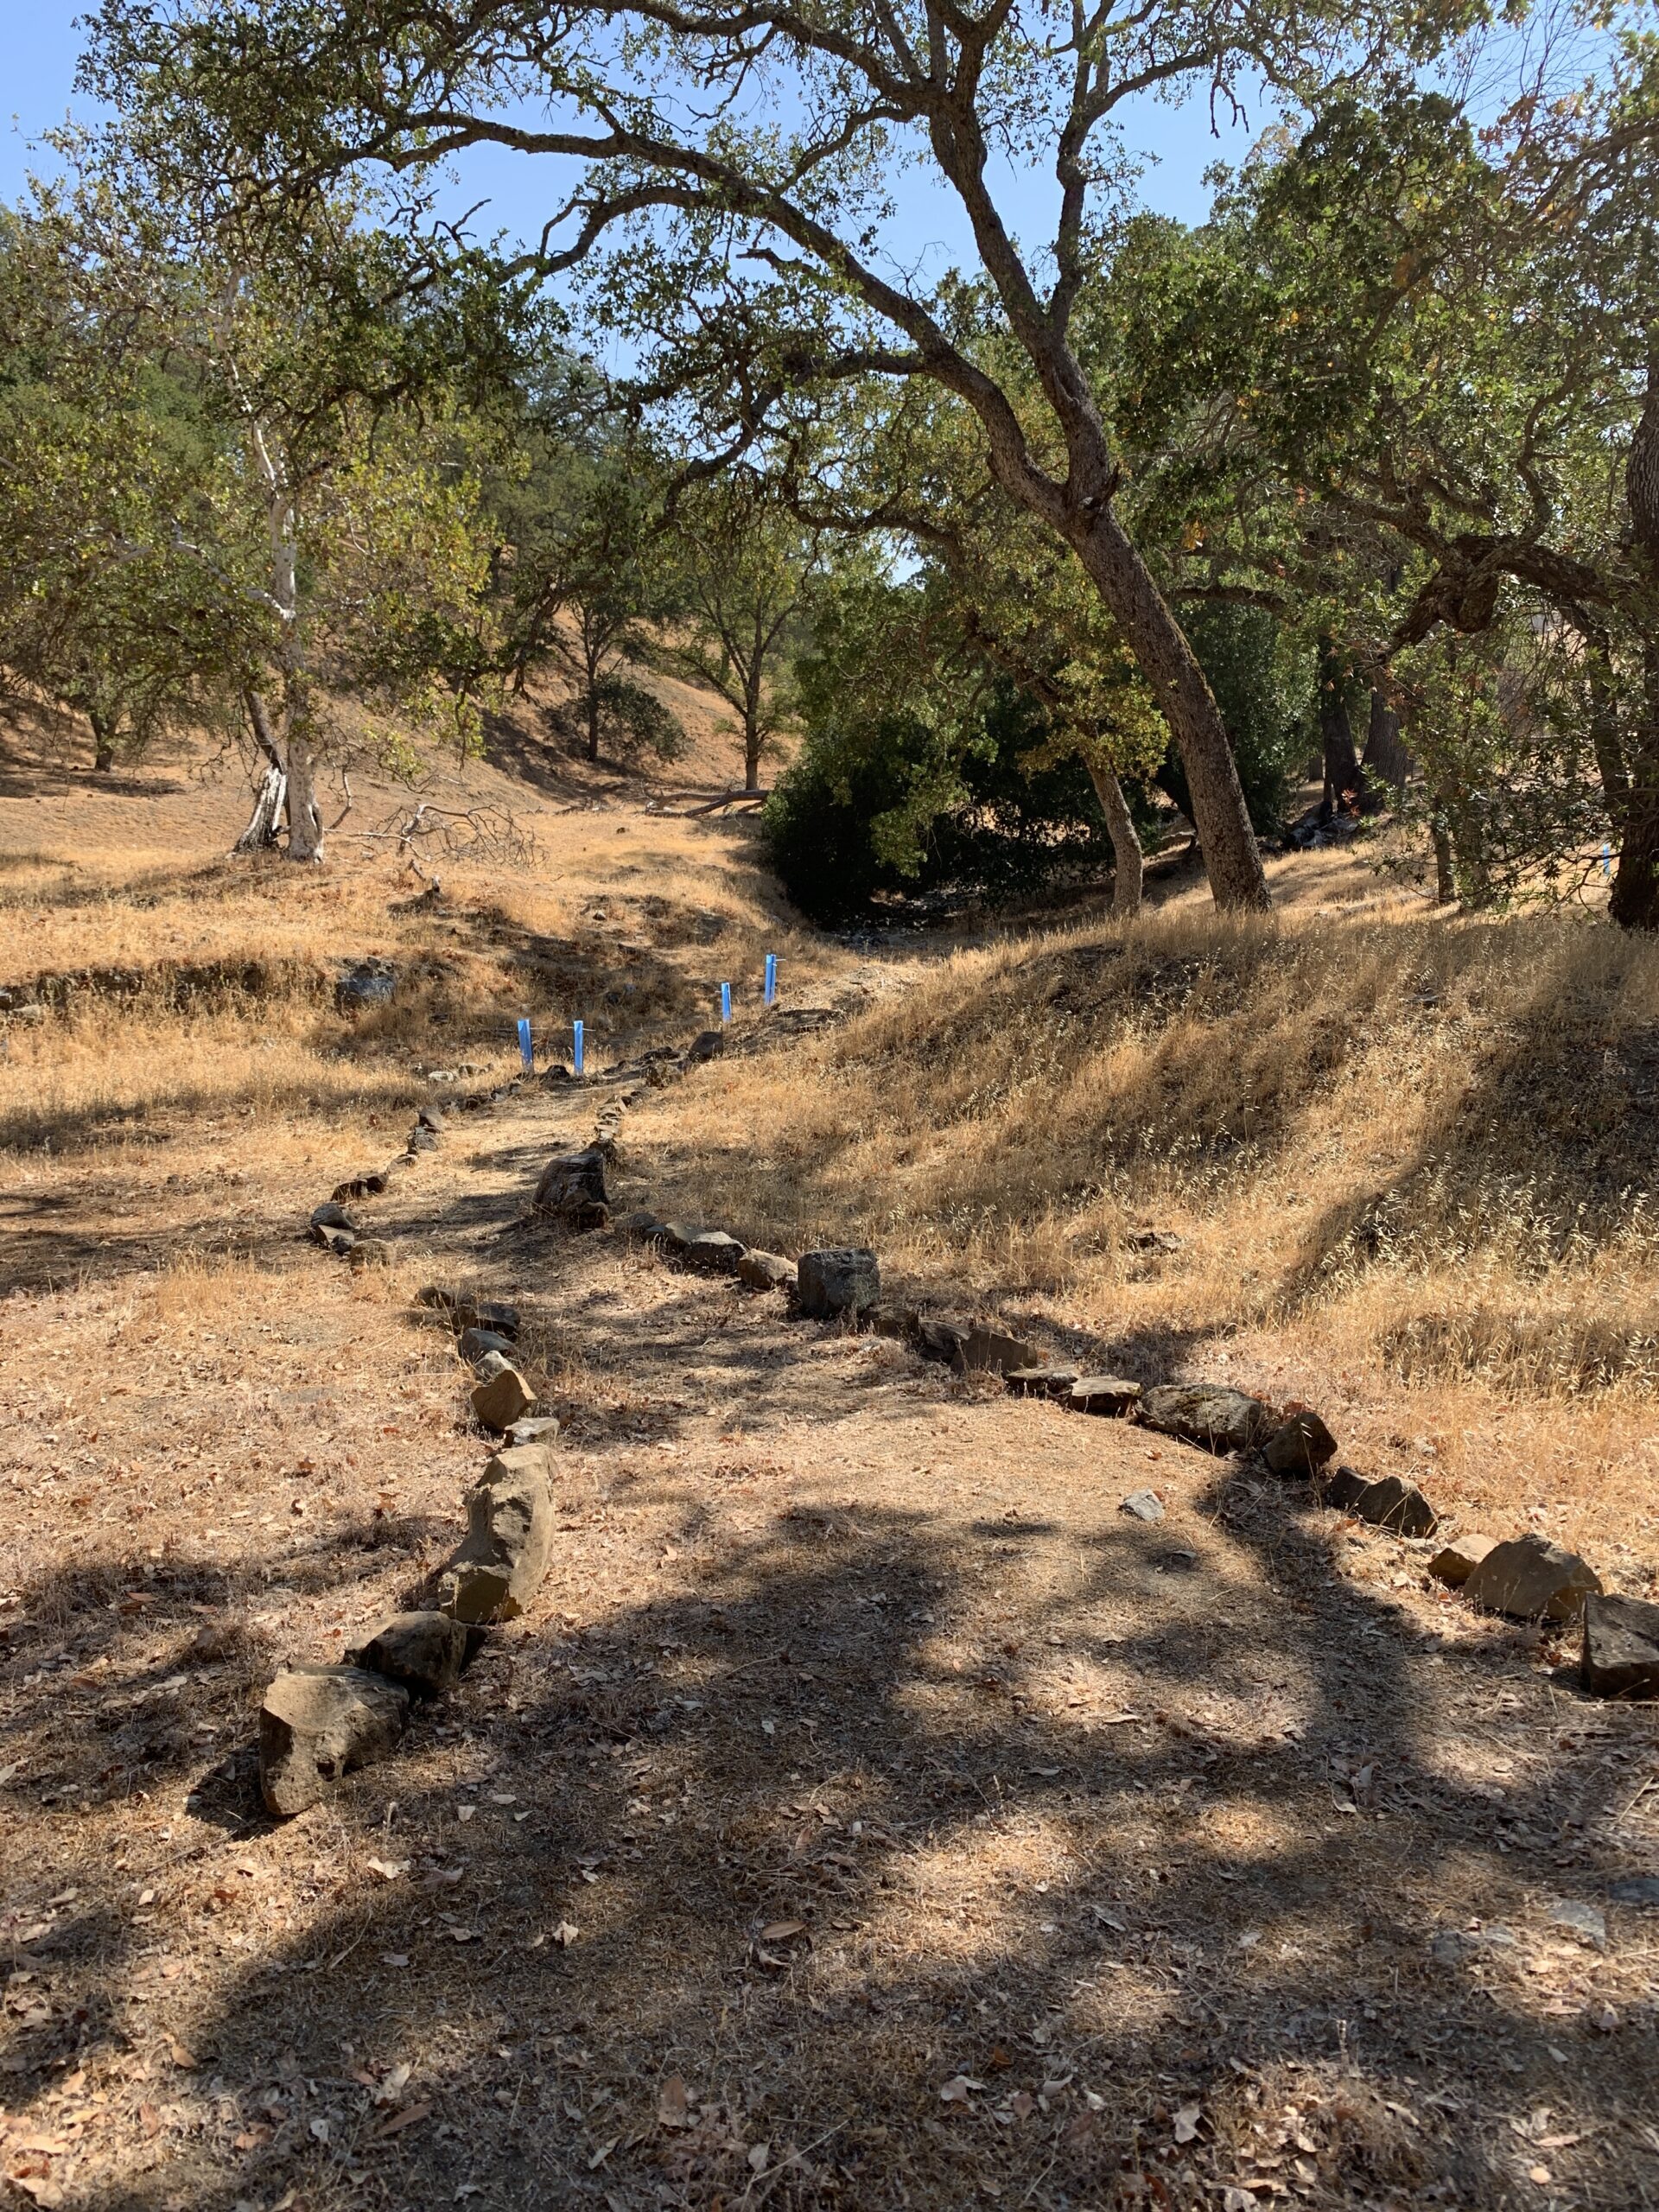 Rock lined trail at Curry Canyon Ranch. Blue tree tubes are in the distance.